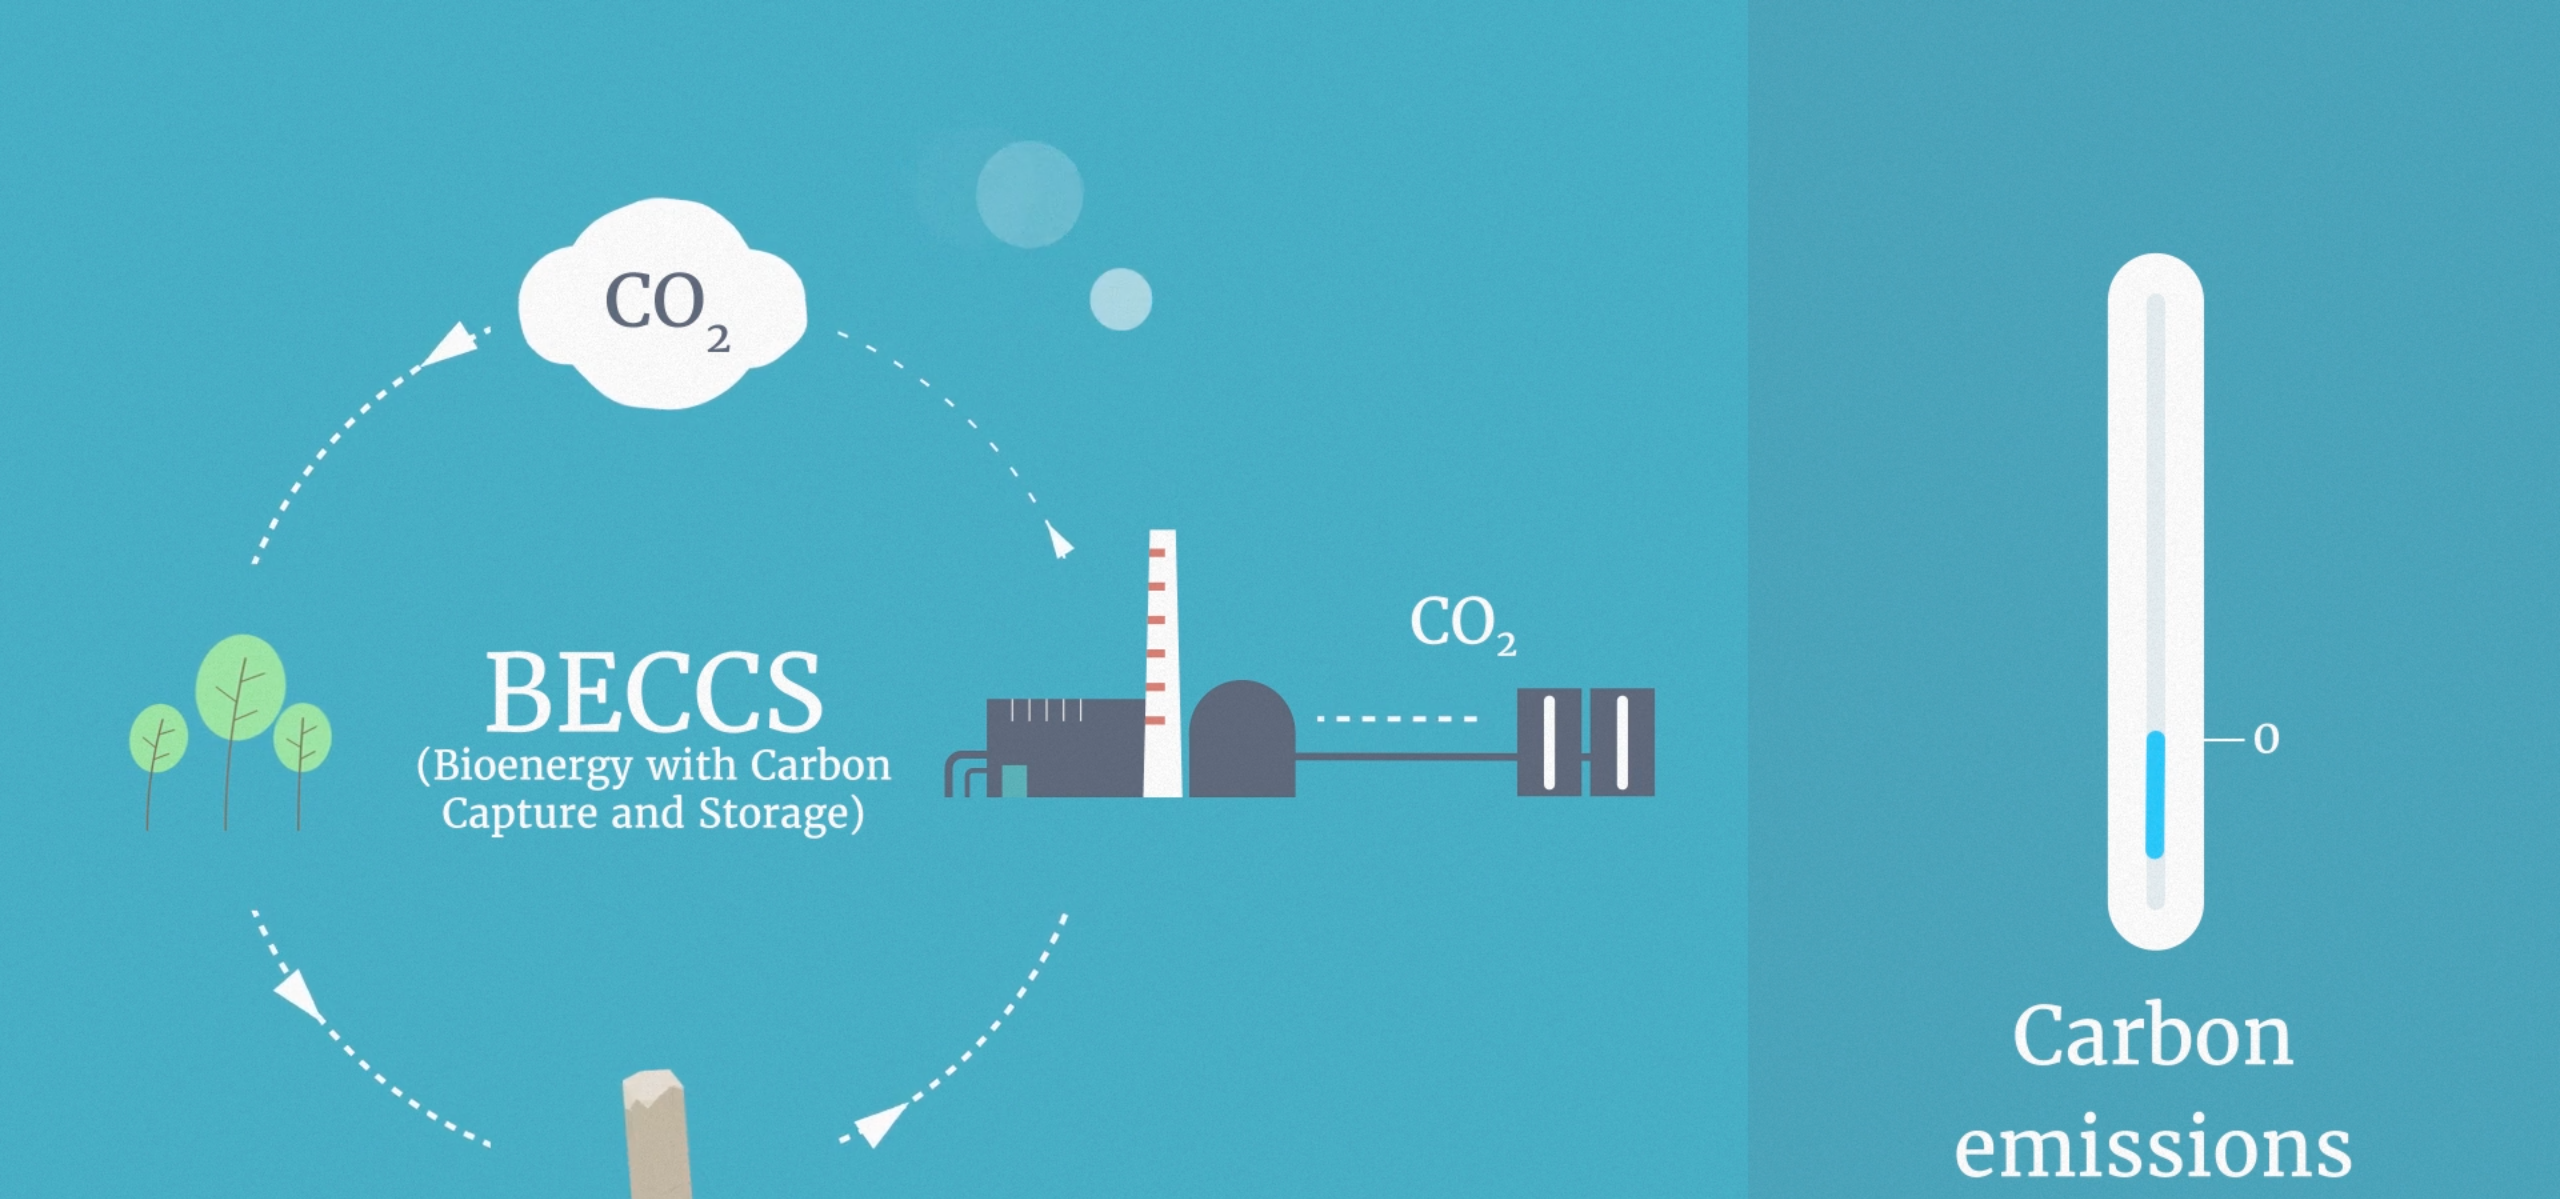 Drax carbon capture and storage pilot project